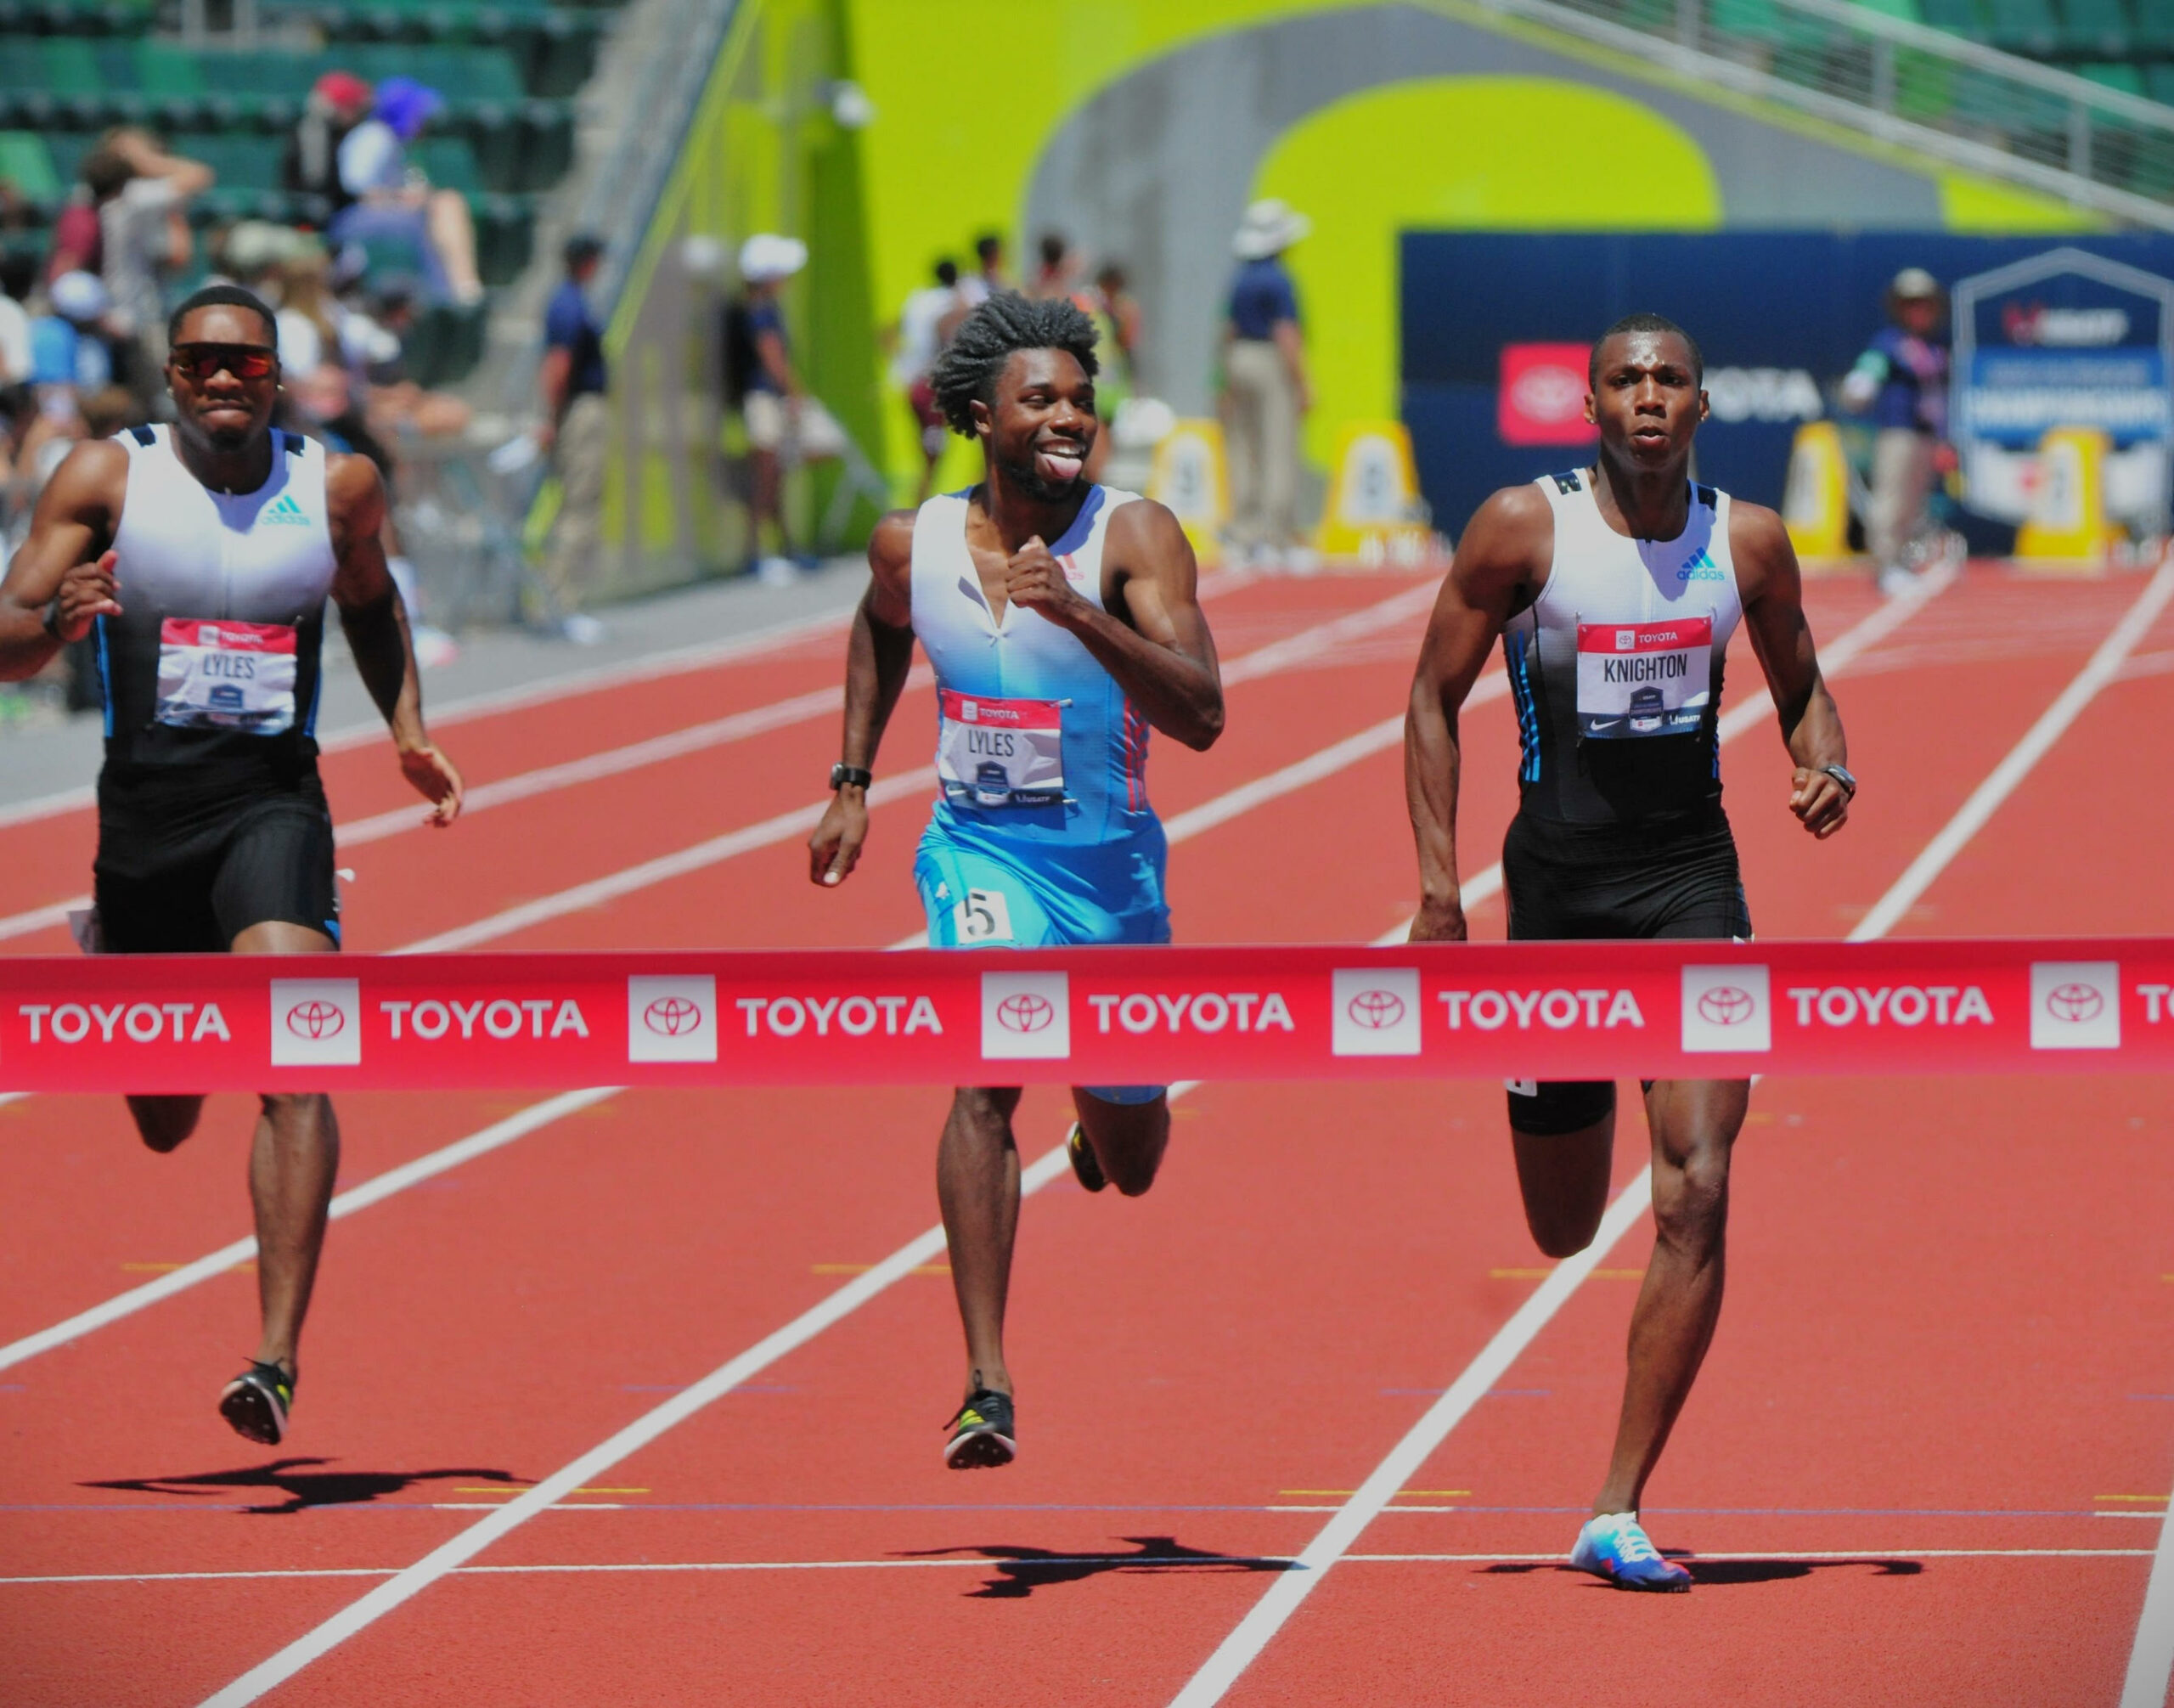 Fan's Daily Guide to the 2022 World Track and Field Championships